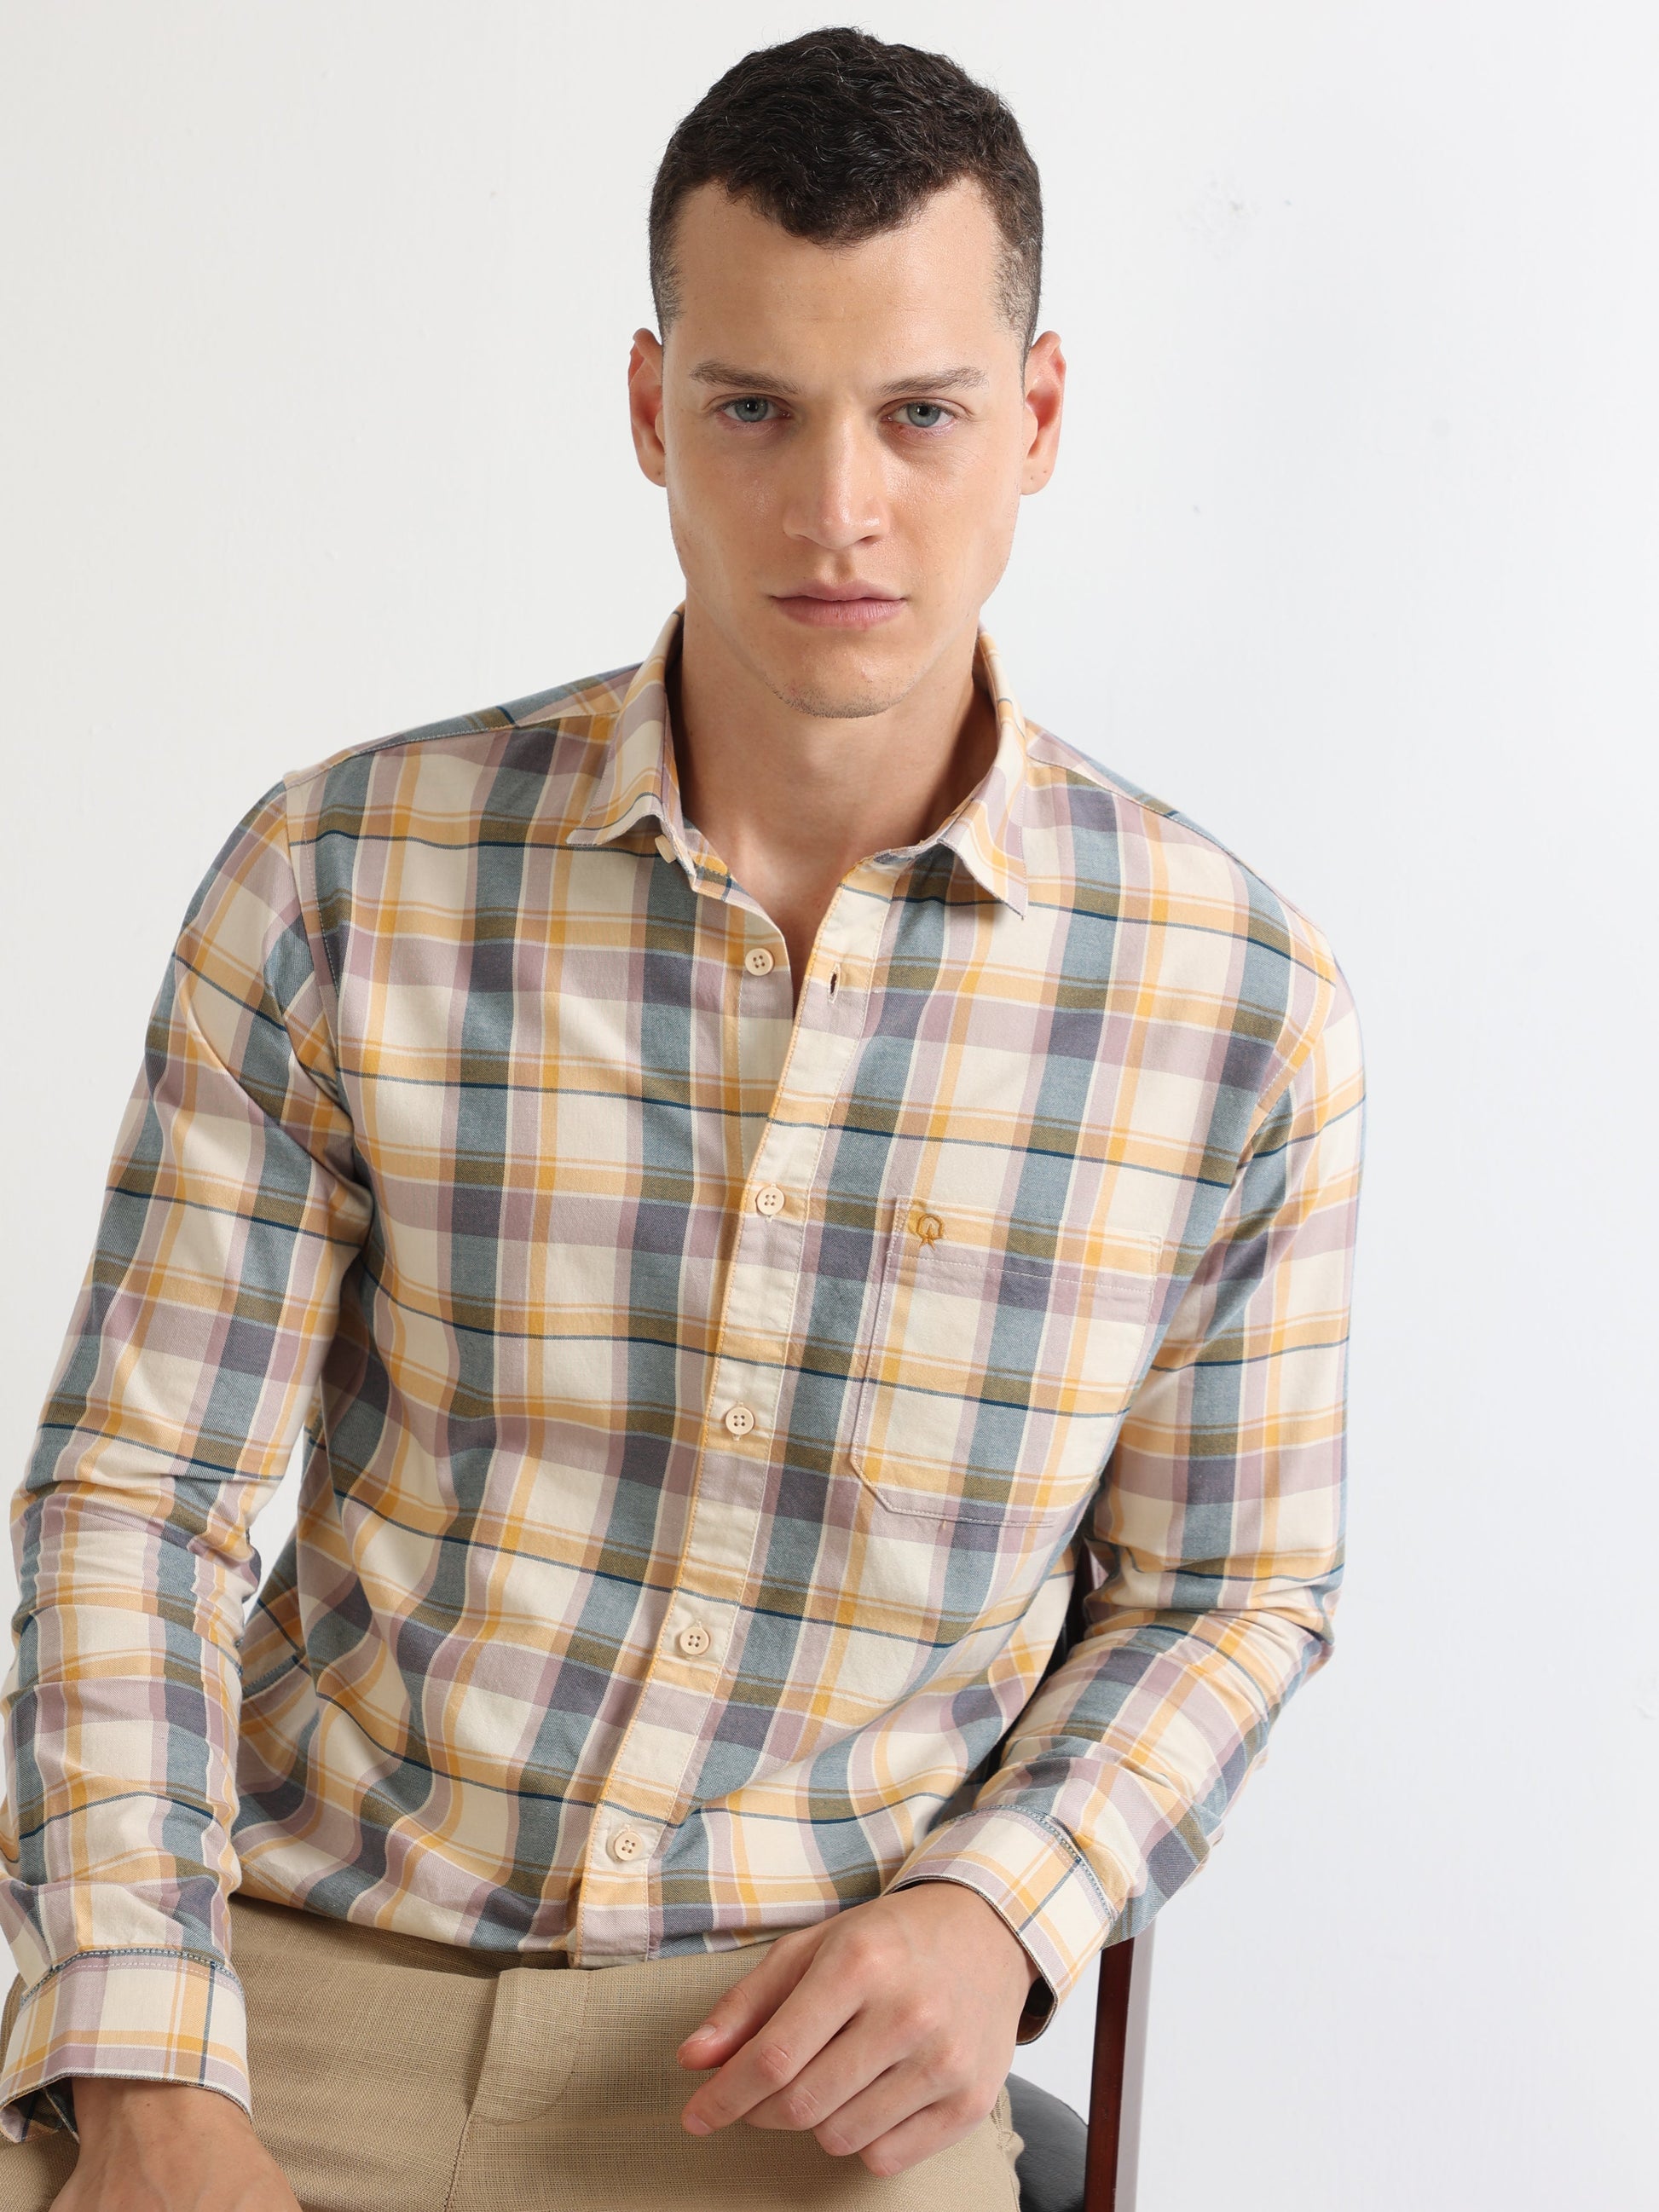 Buy Single Pocket Smart Casual Oxford Checked Shirt Online.